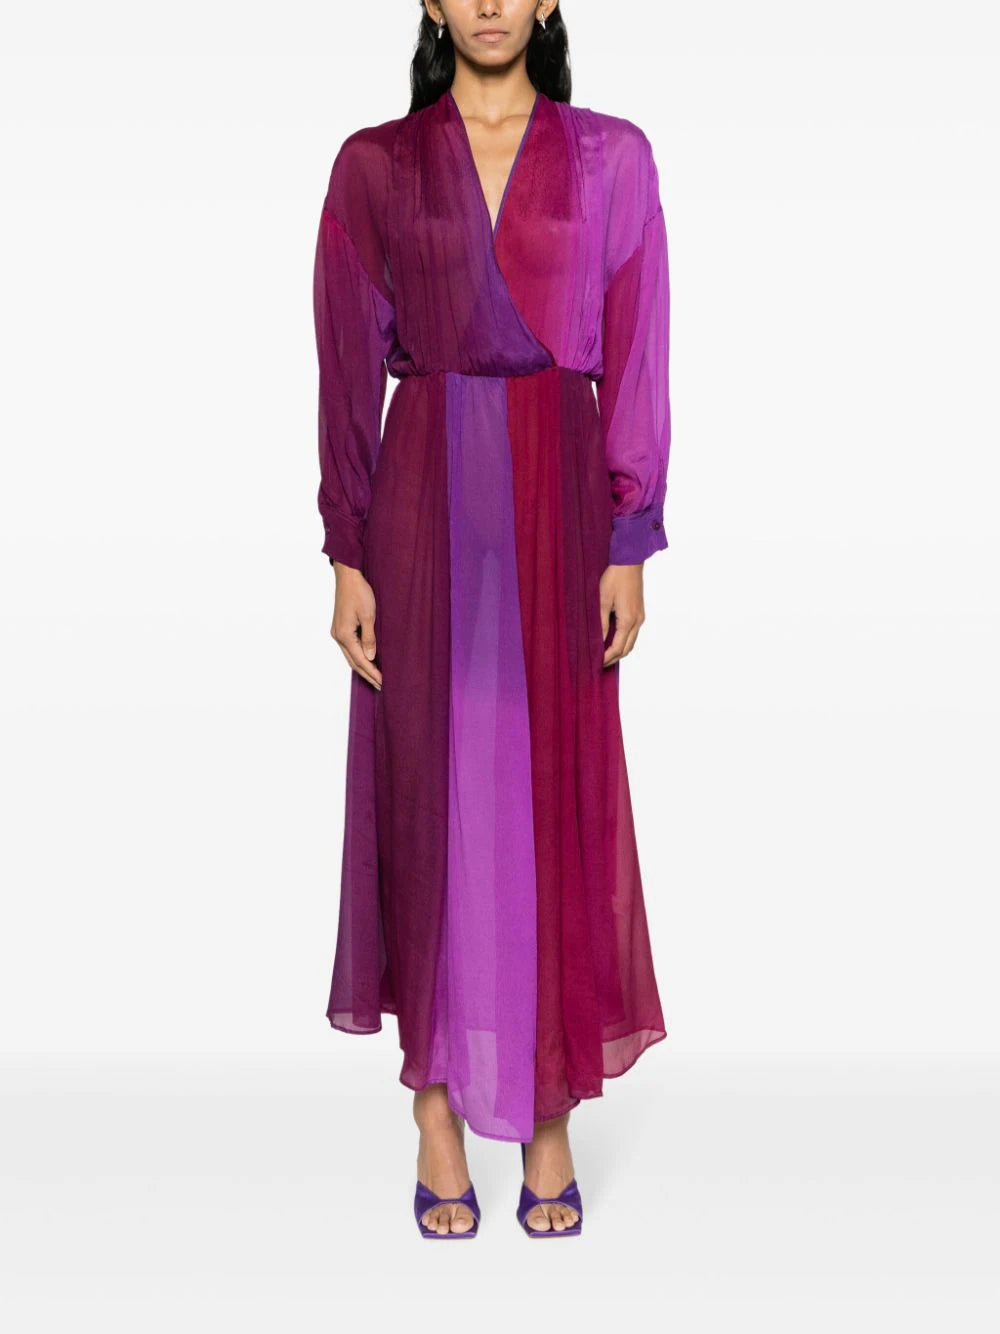 Crepon silk long shaded dress, cocktail